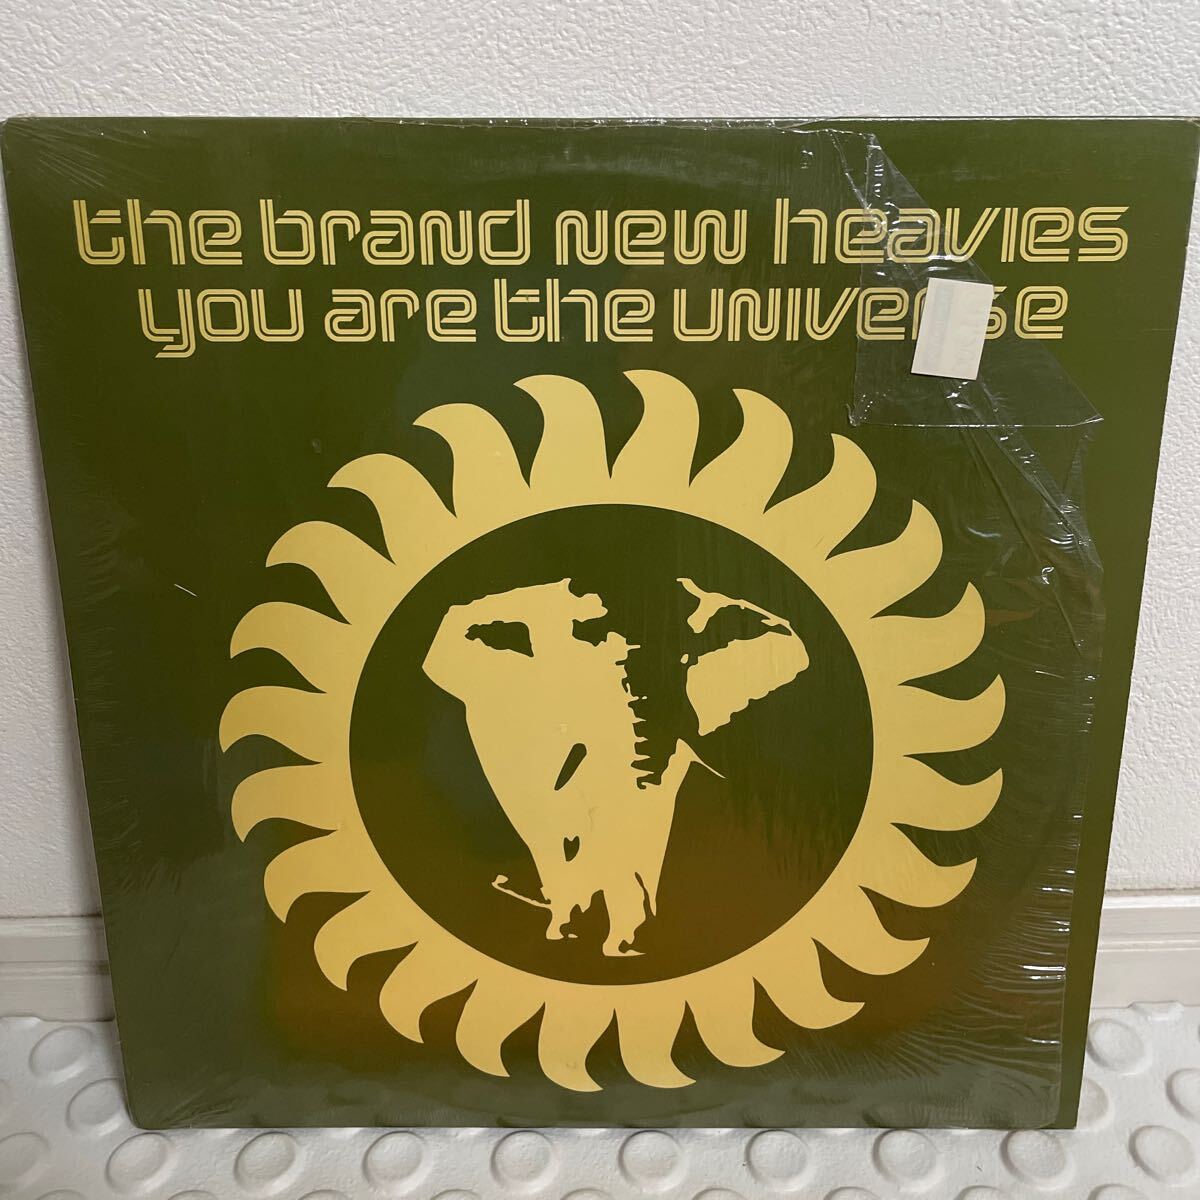 The Brand New Heavies You Are The Universe 名曲　https://youtu.be/0Om_l8SP9VE?si=4ZD5CXYH-0ownLZ_画像1